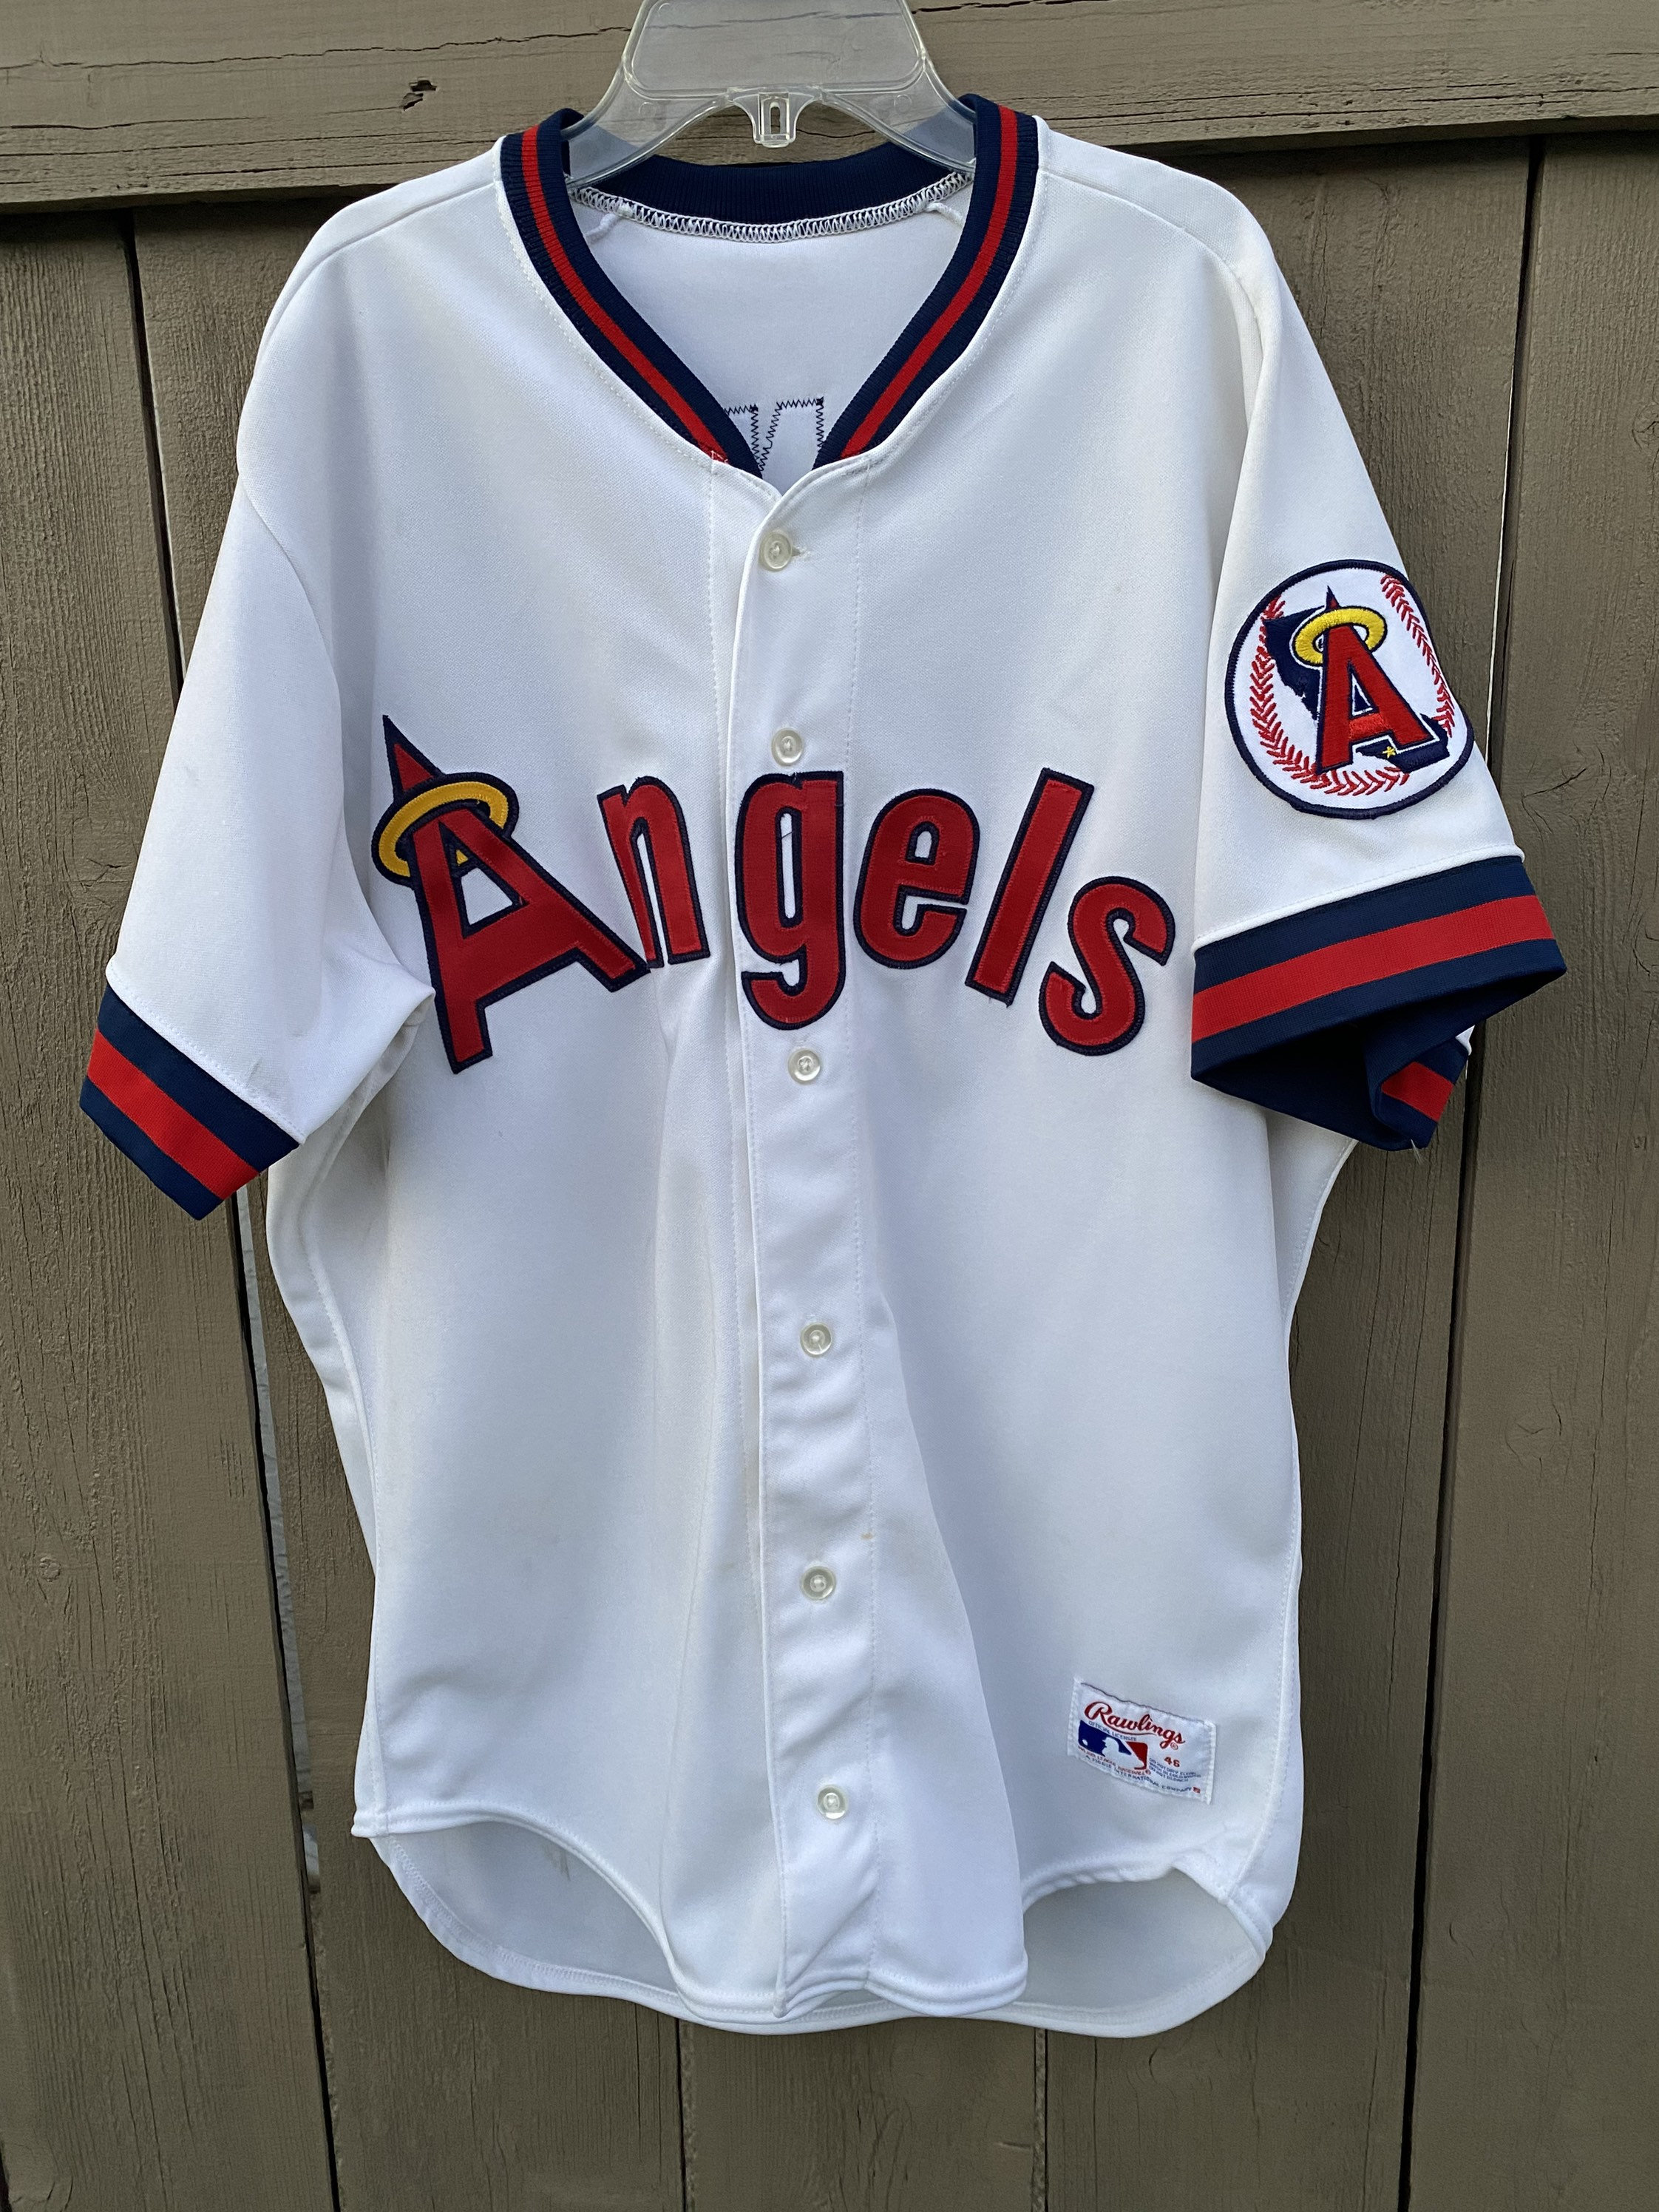 Has anyone ever bought this Angels pinstripes jersey? If so, from where?  I've looked around but haven't found one that looks as original as this  one. : r/angelsbaseball